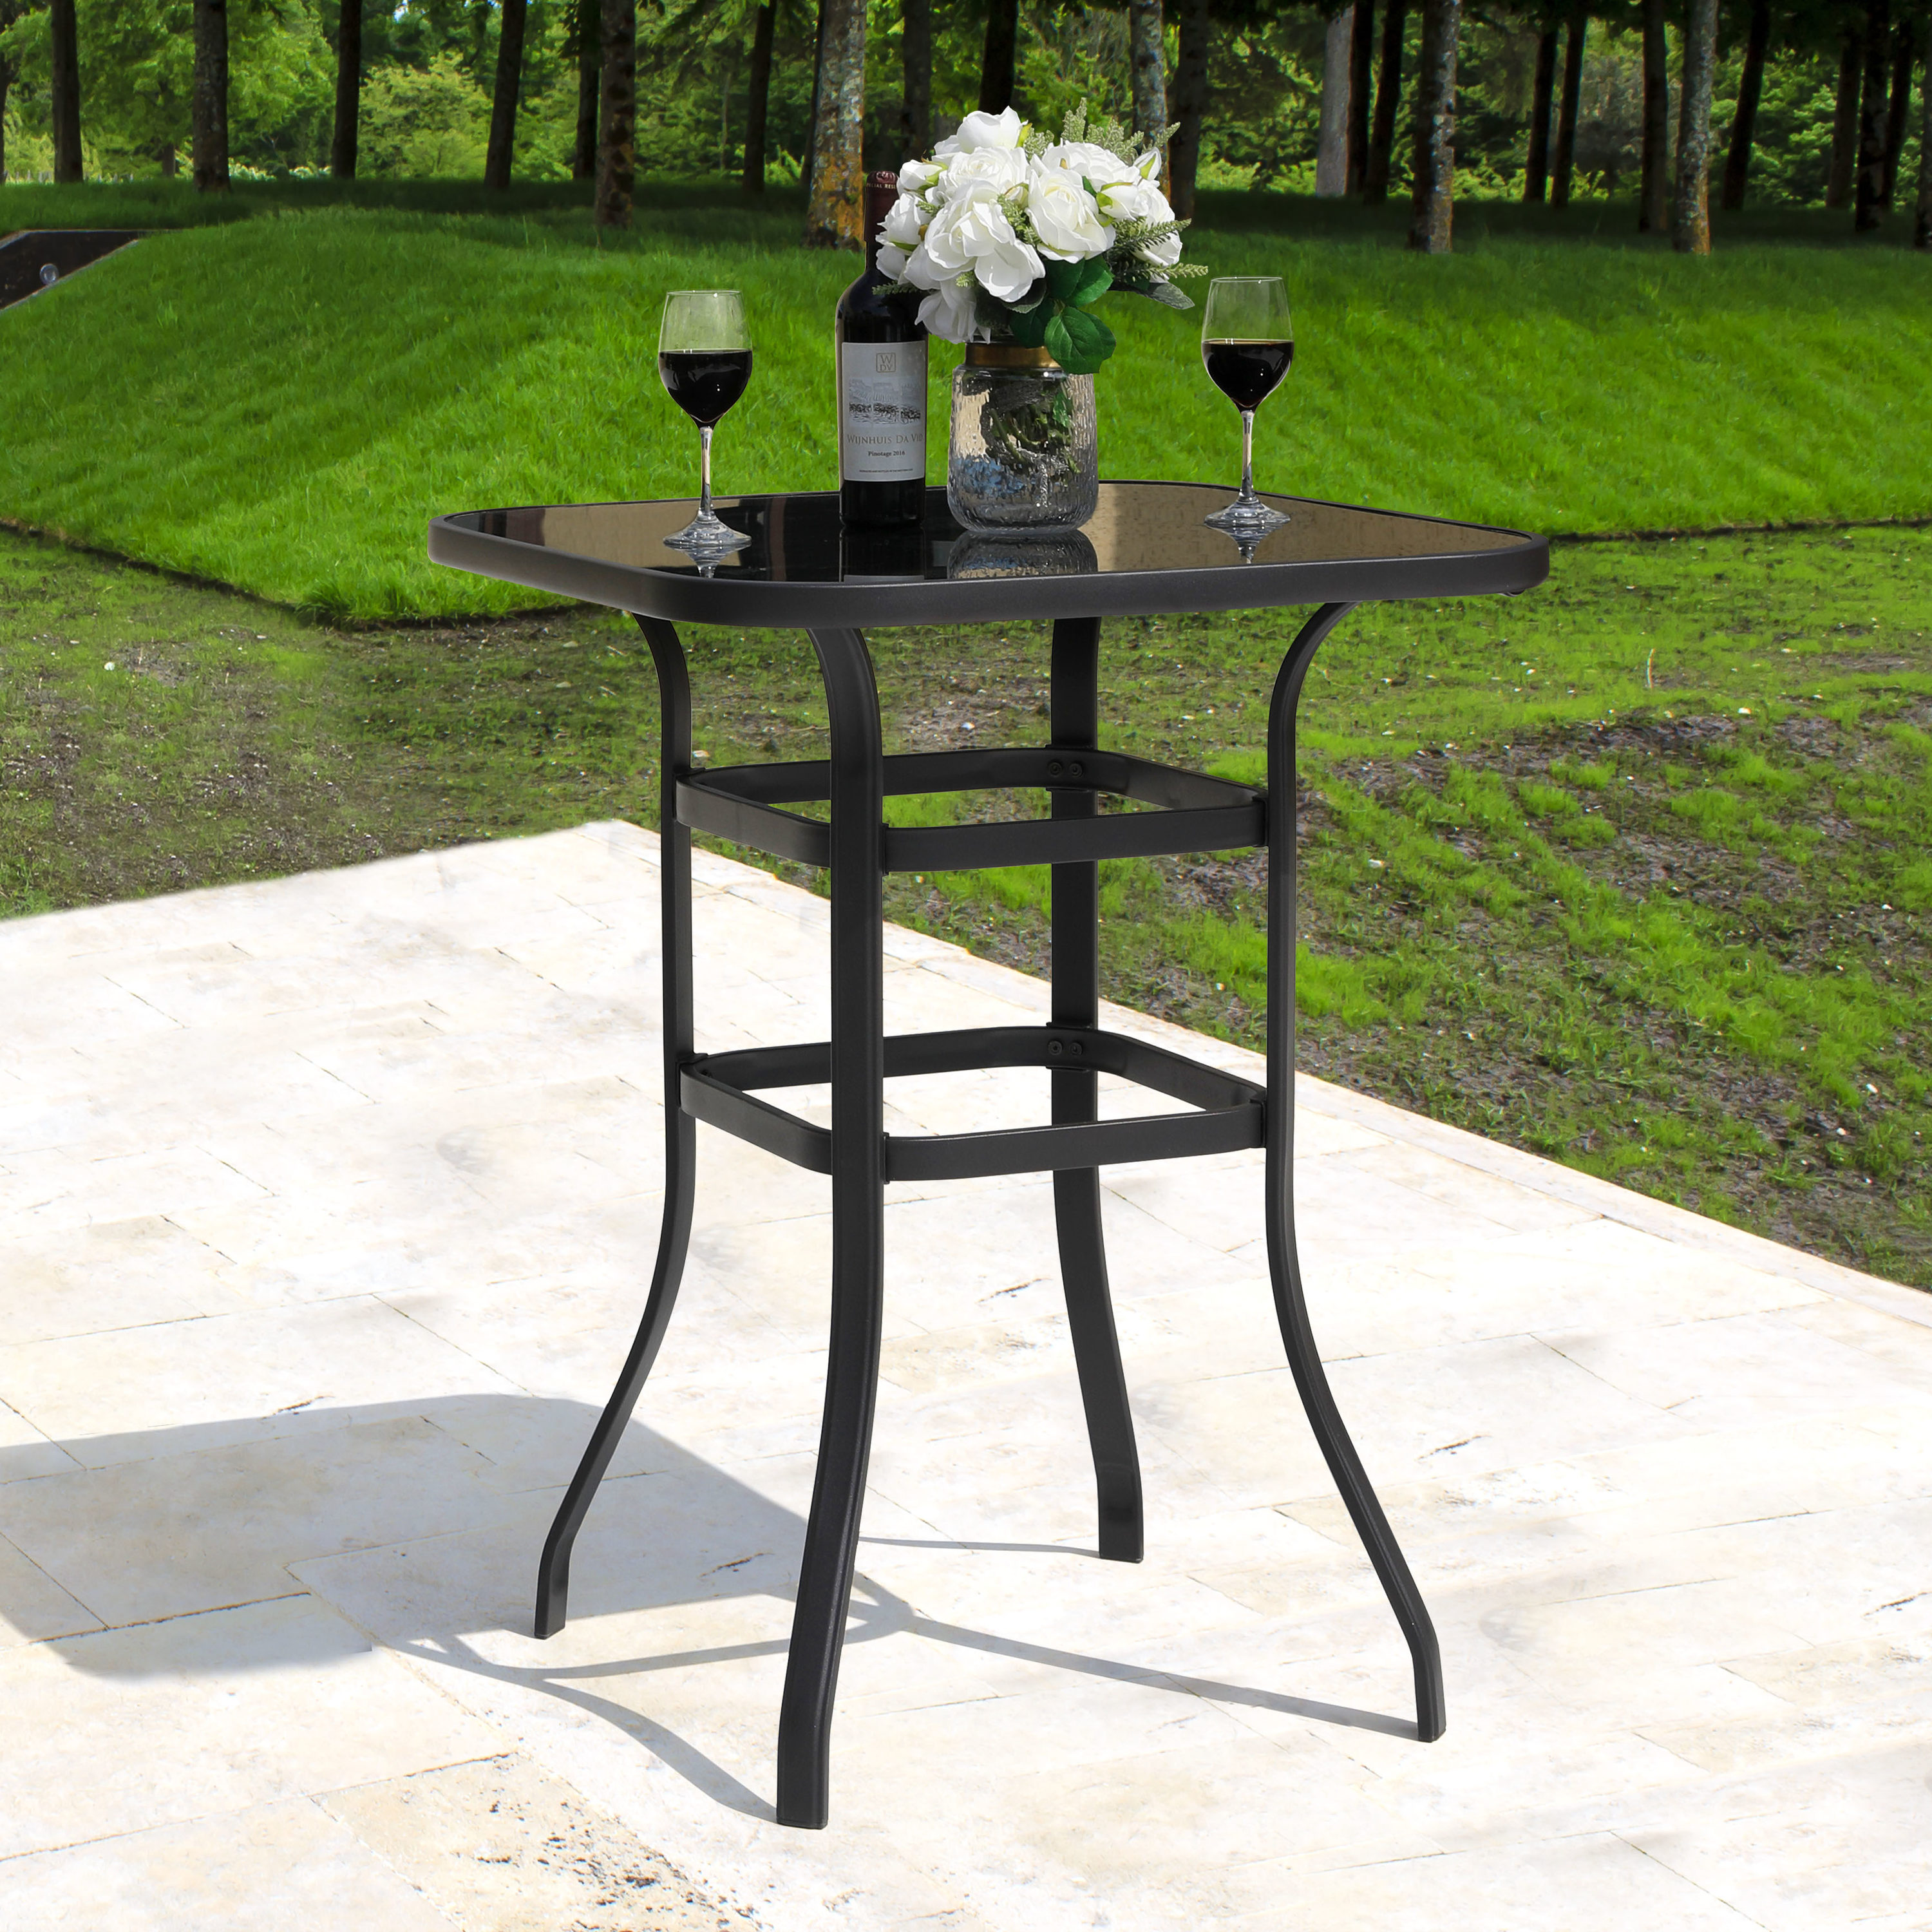 Nuu Garden Square Outdoor Bar Height Table 315 In W X 315 In L In The